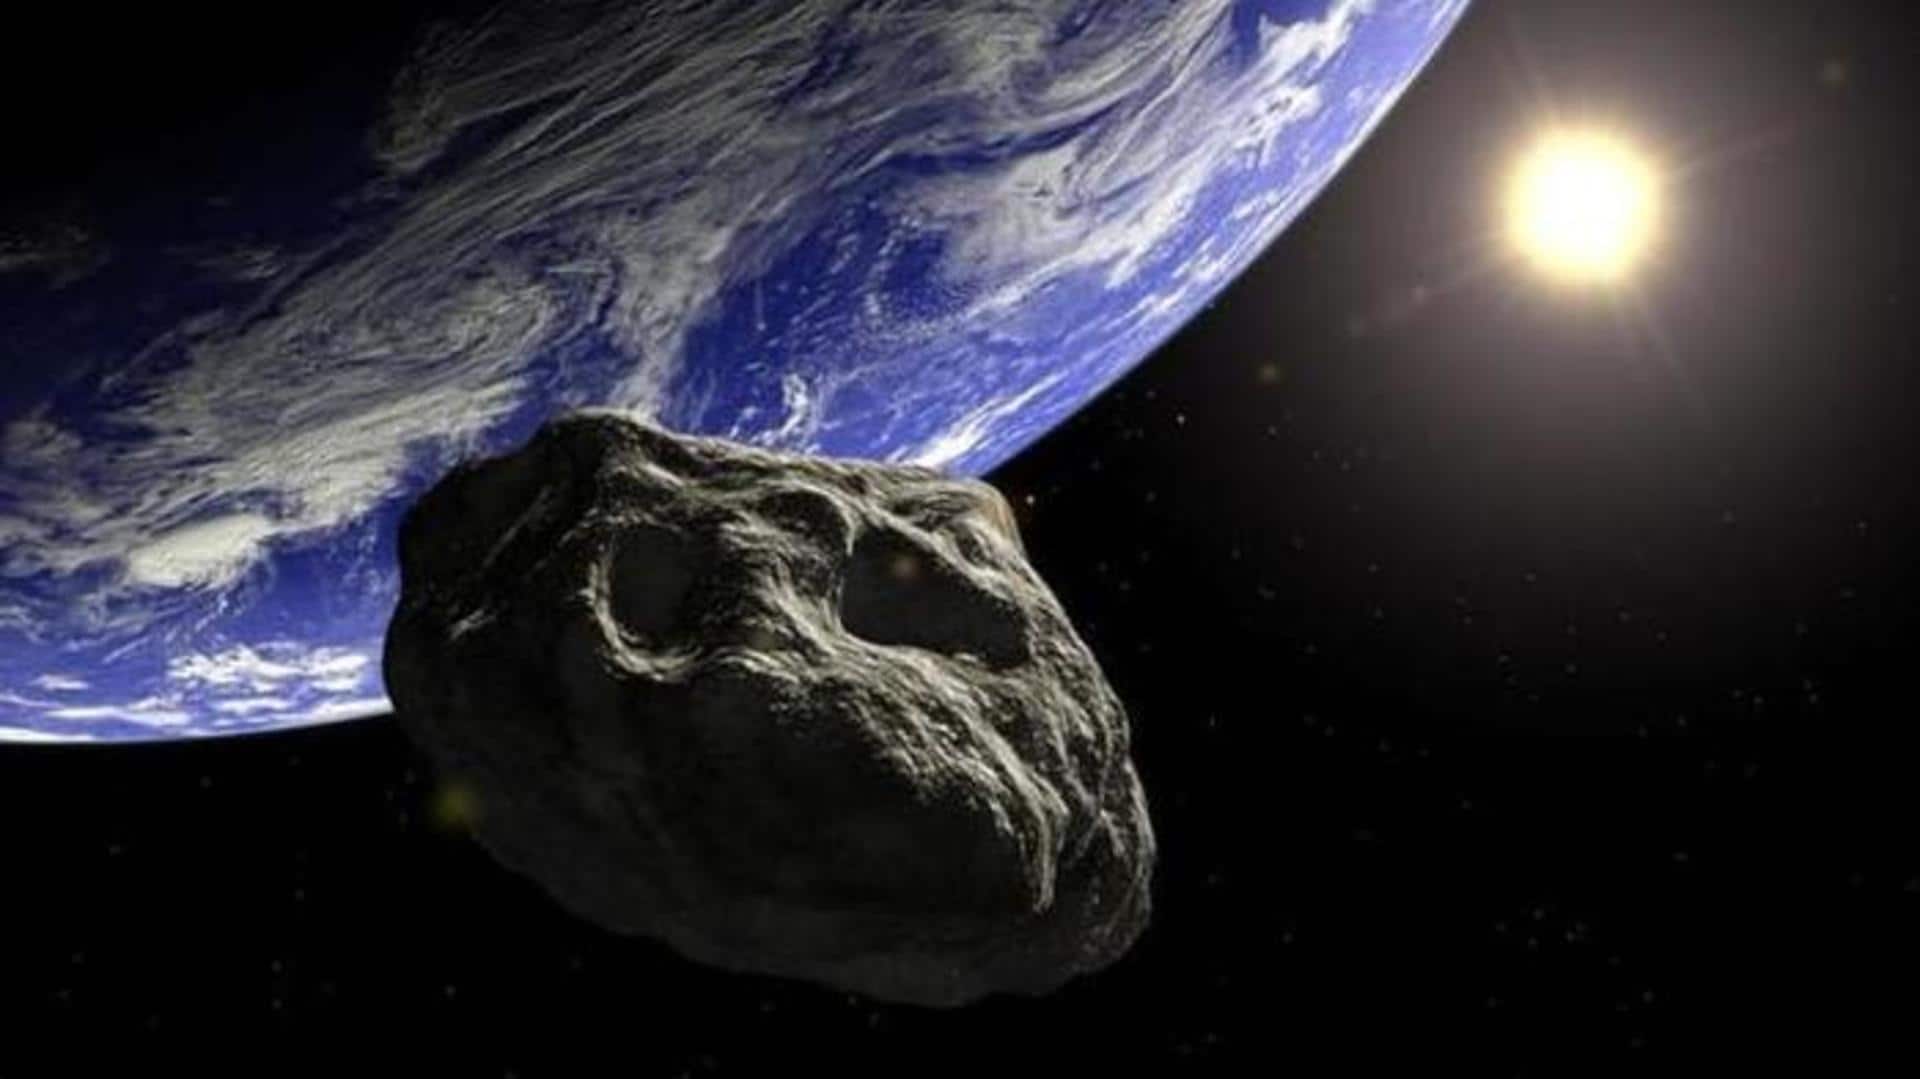 NASA shares details of 5 asteroids hurtling toward Earth today